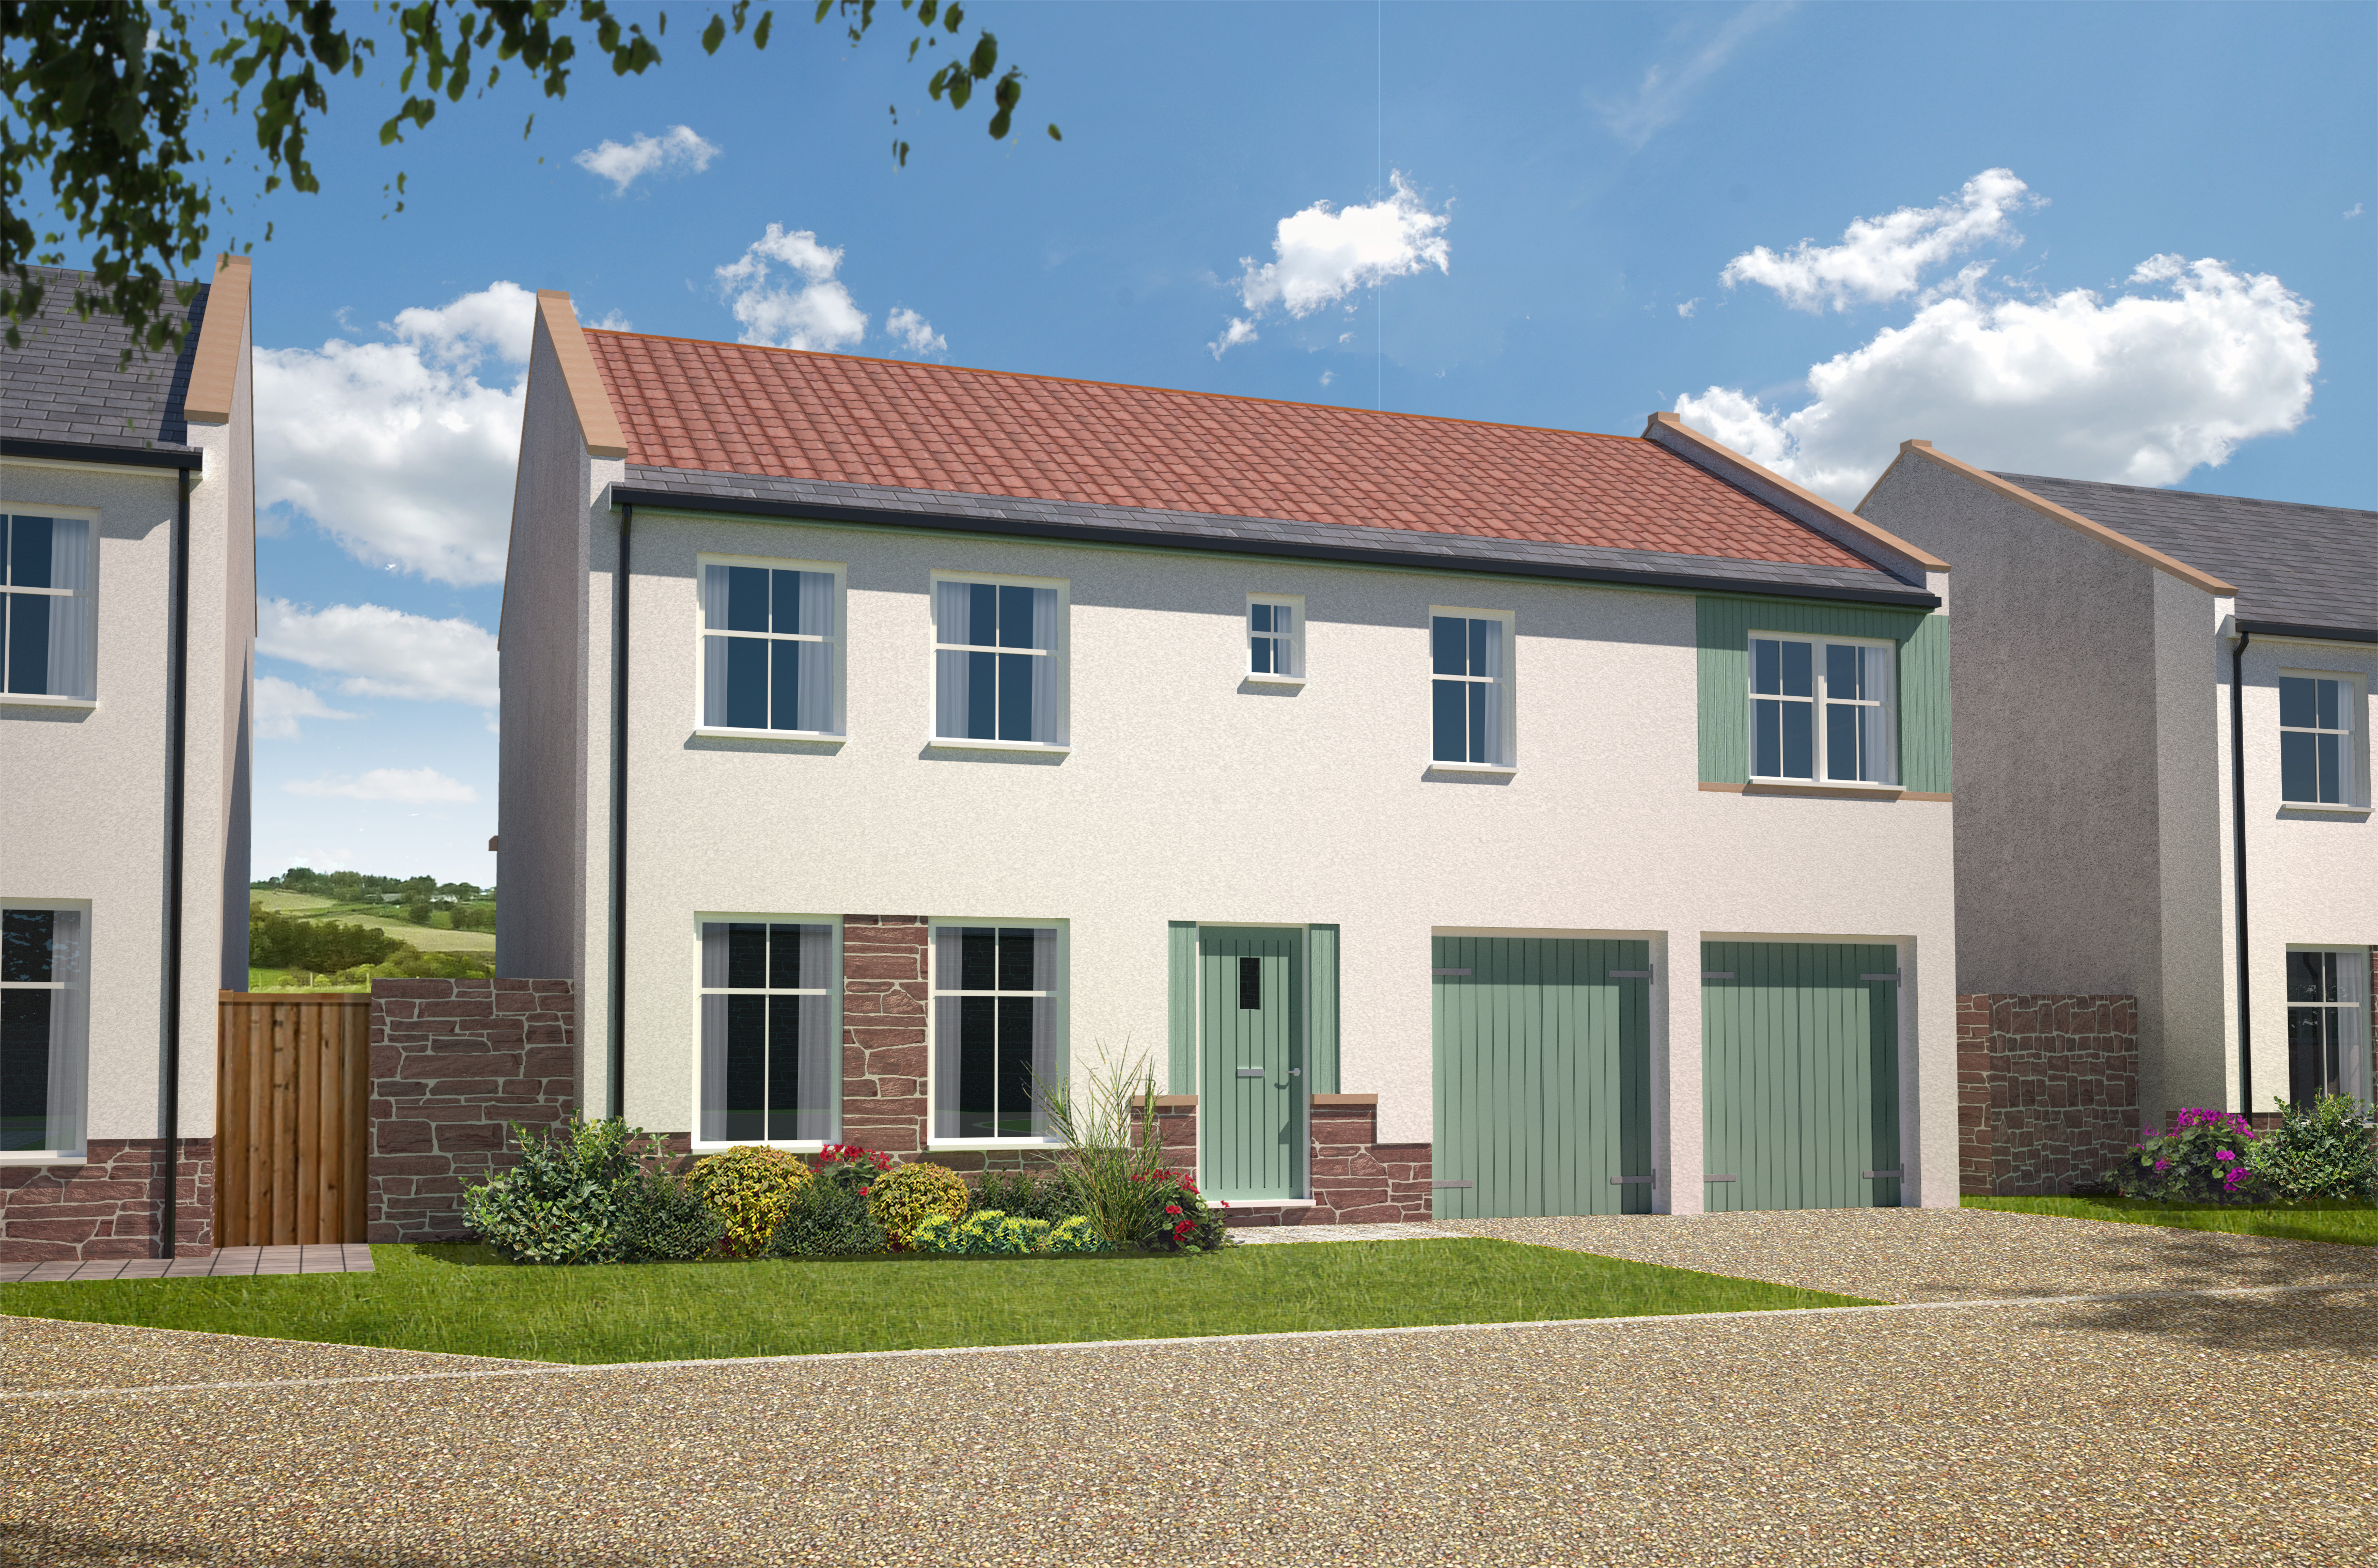 PLOT 3 IS NOW SOLD